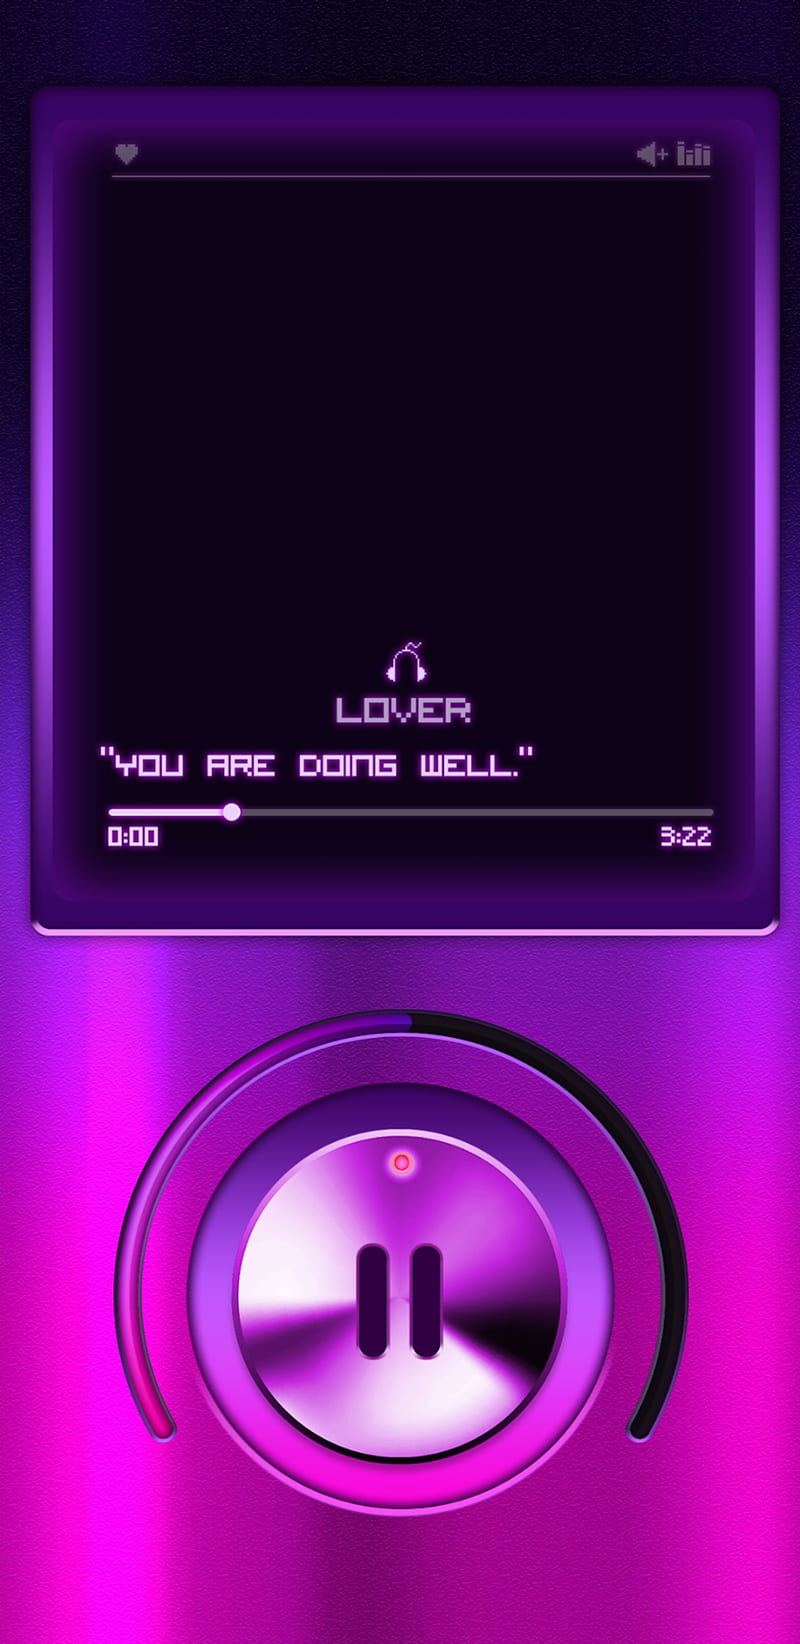 Music Lover, game, games, ipod, love, pink, purple, tablet, technology, video, HD phone wallpaper